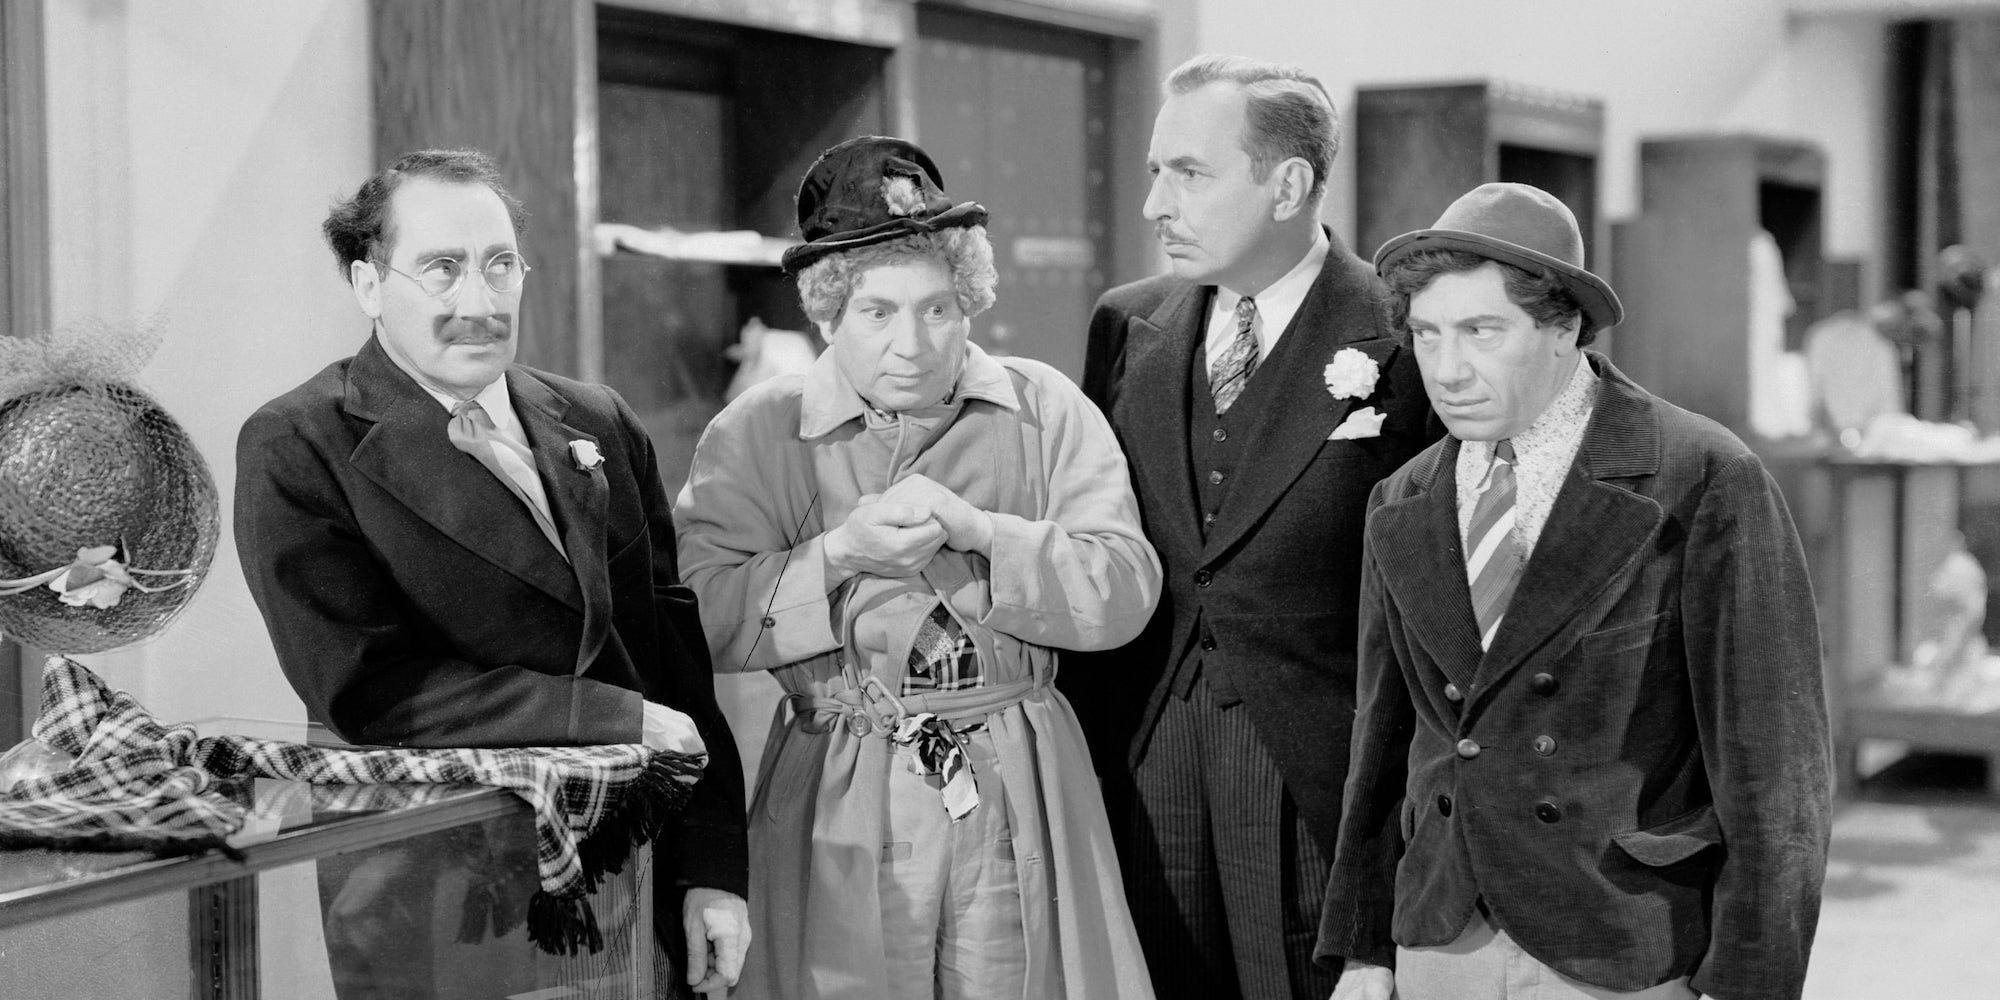 Marx Brothers (Groucho, Harpo, Chico) in The Big Store